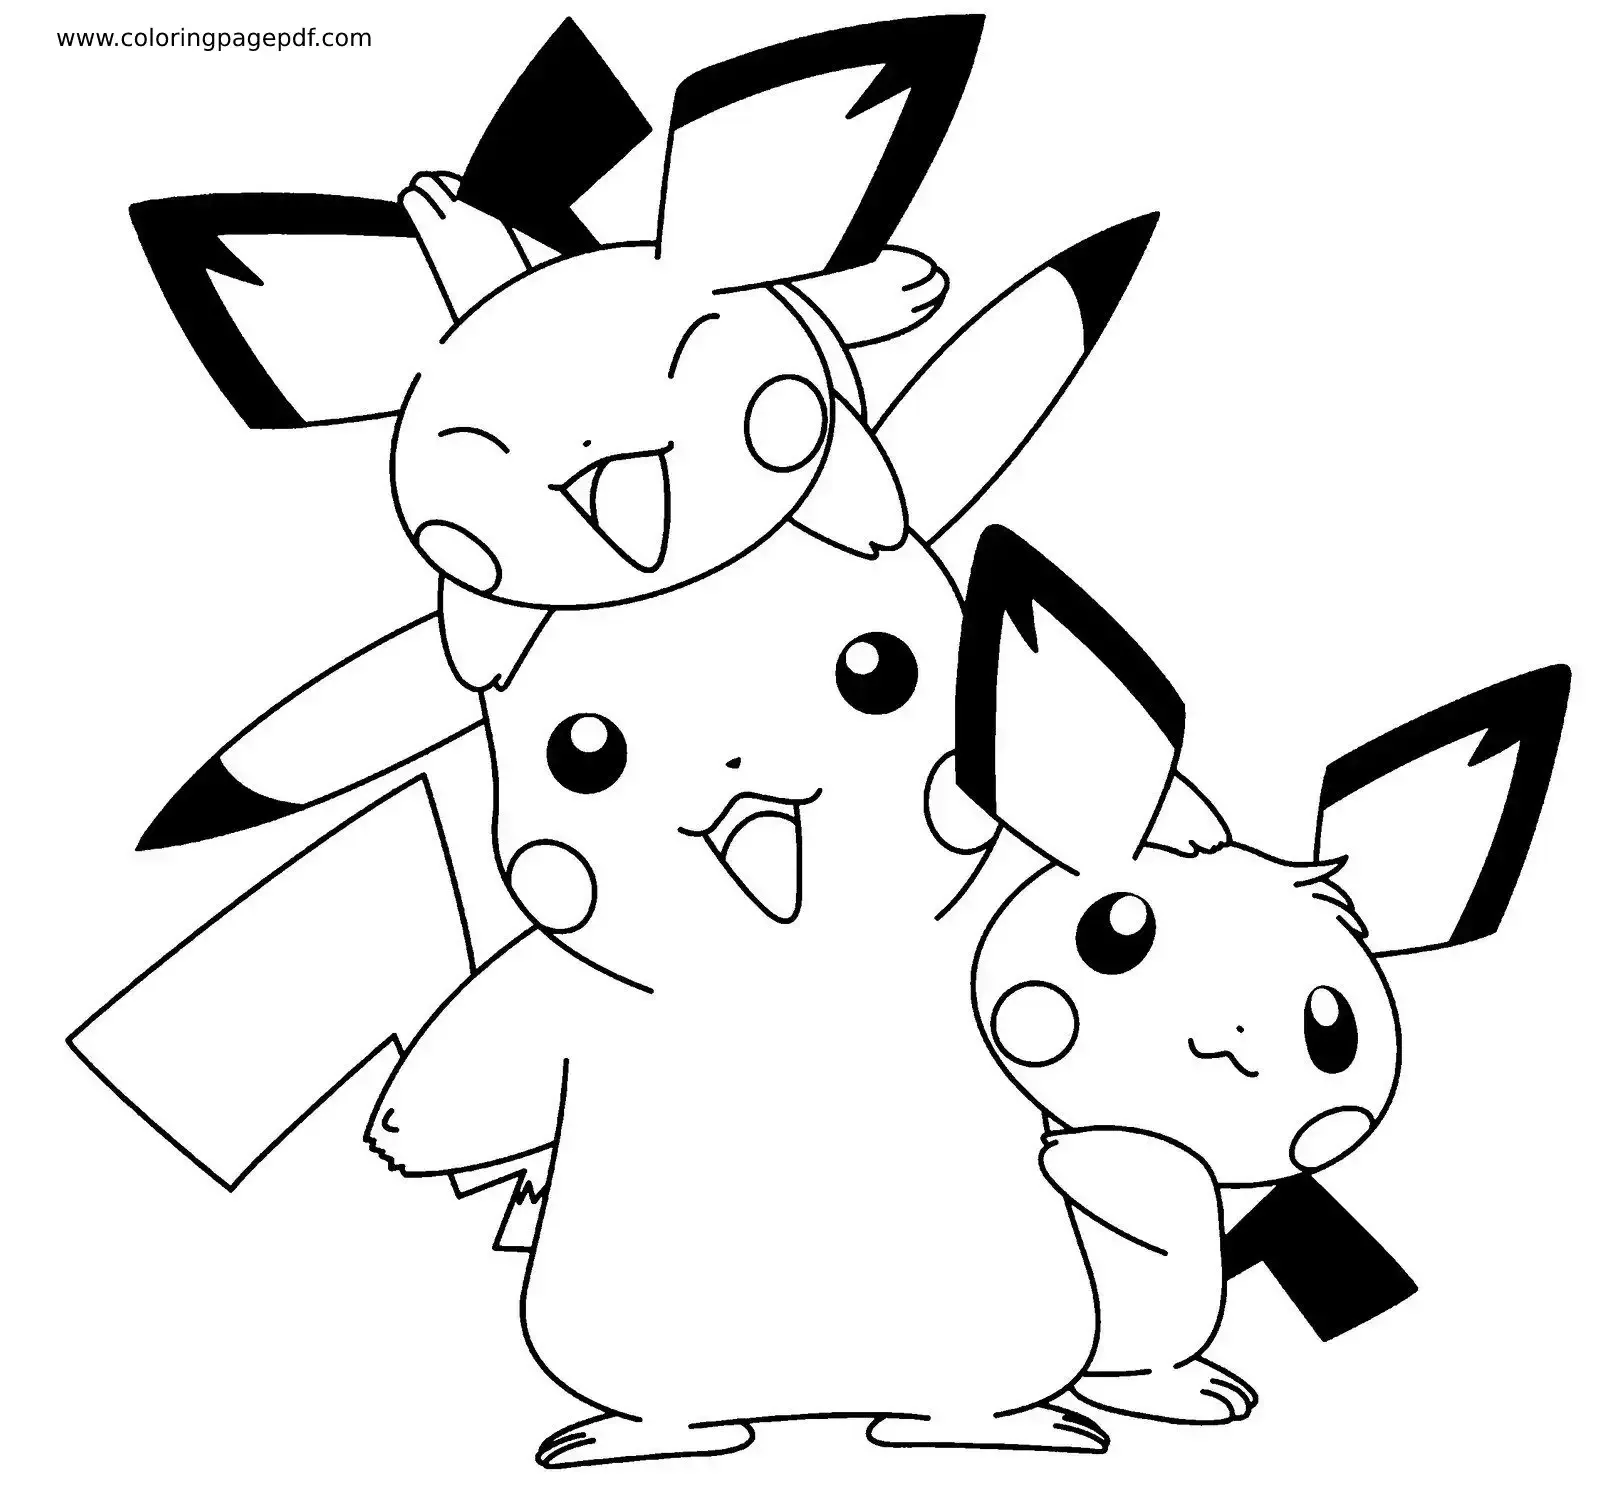 Coloring Page Of Pichu And Pikachu